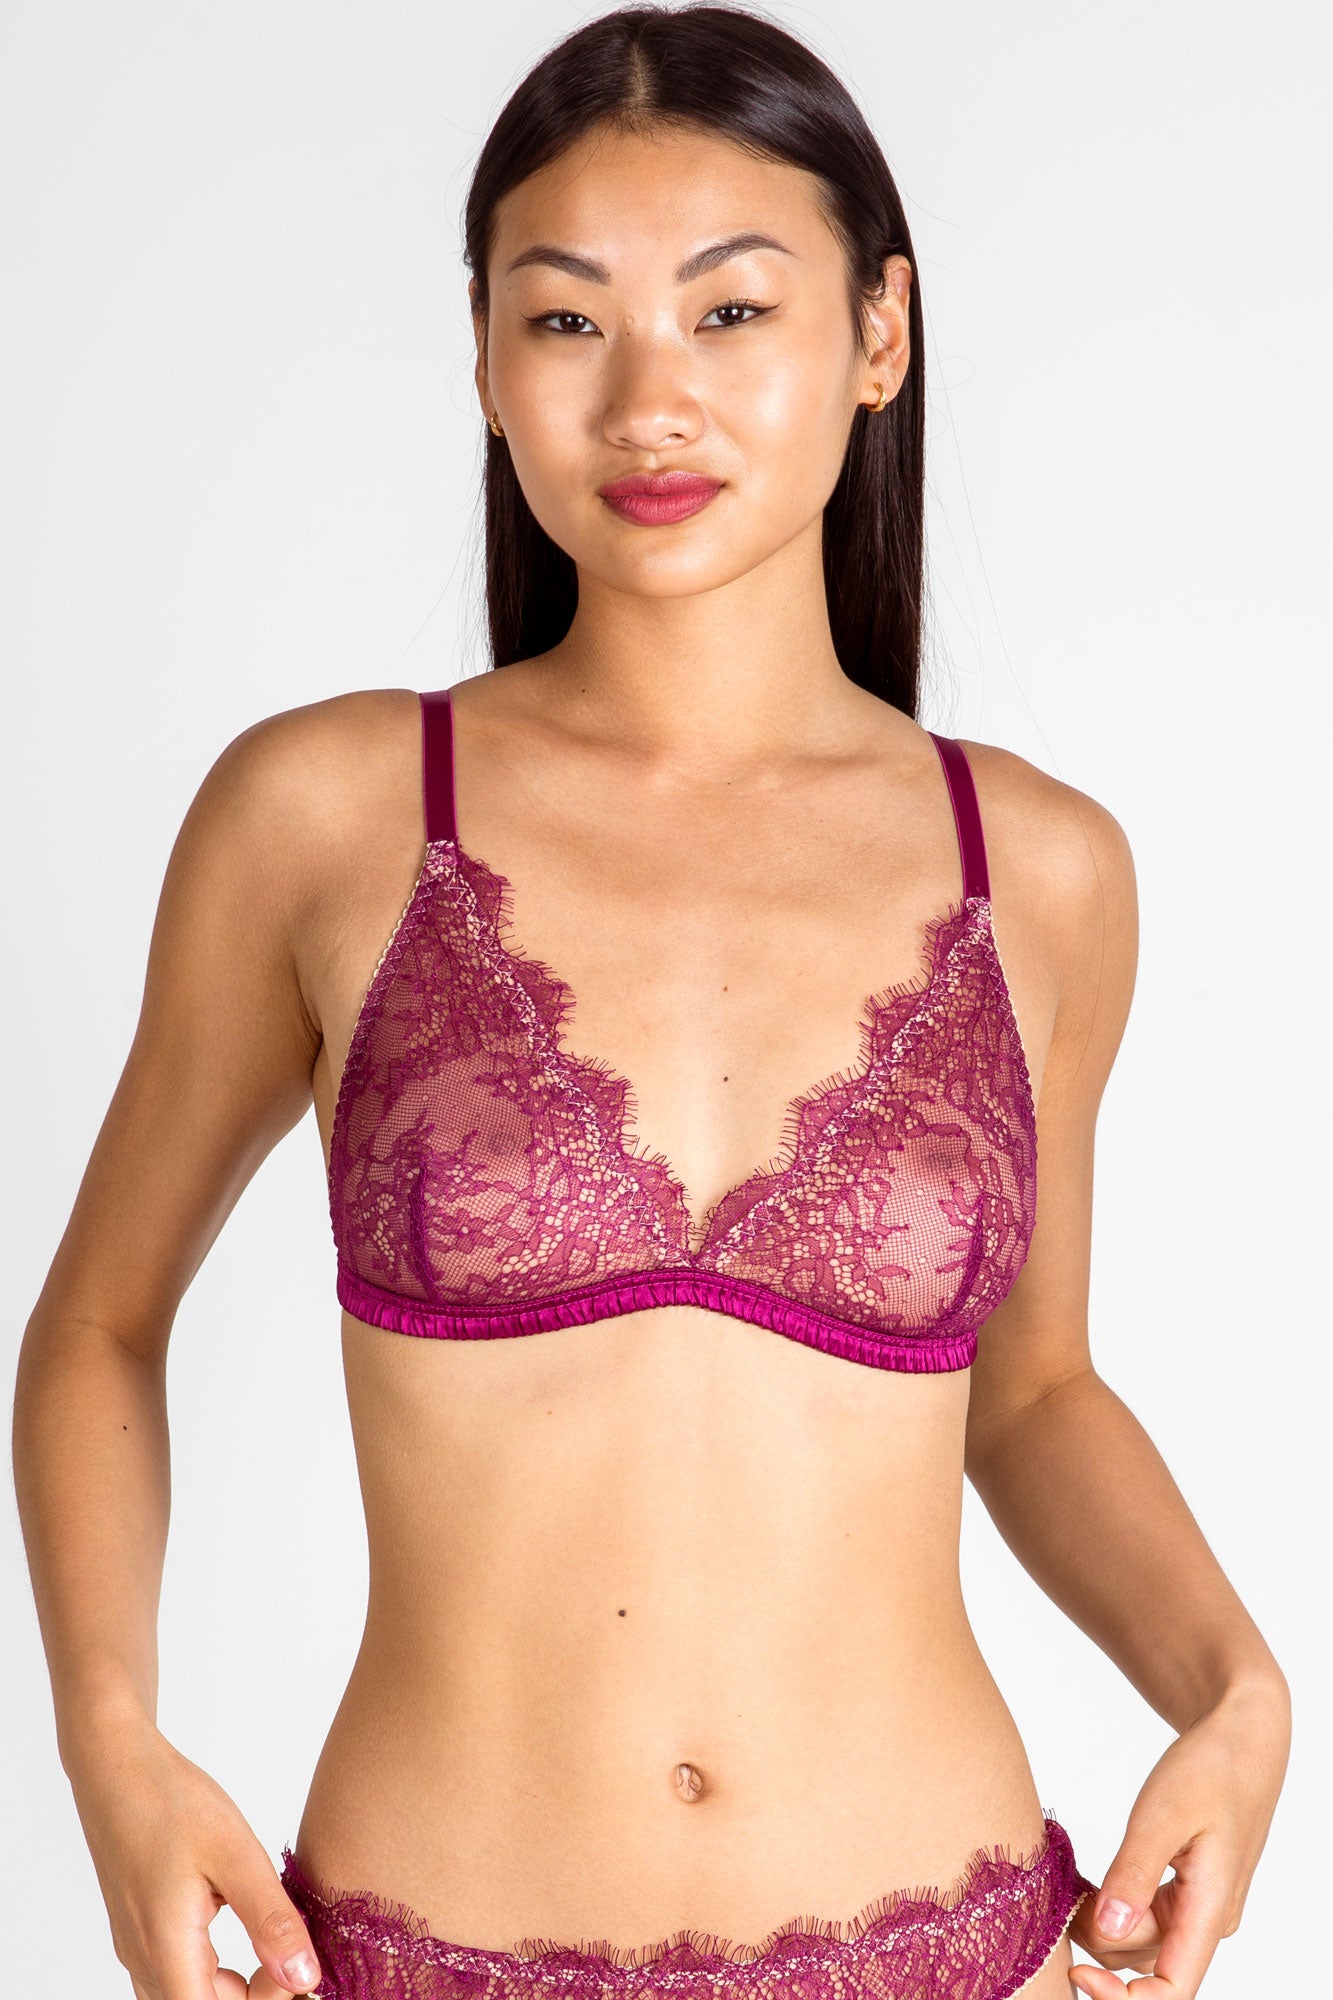 Women's Lace Bralette Sheer Unlined Wireless Bra With Double Layers